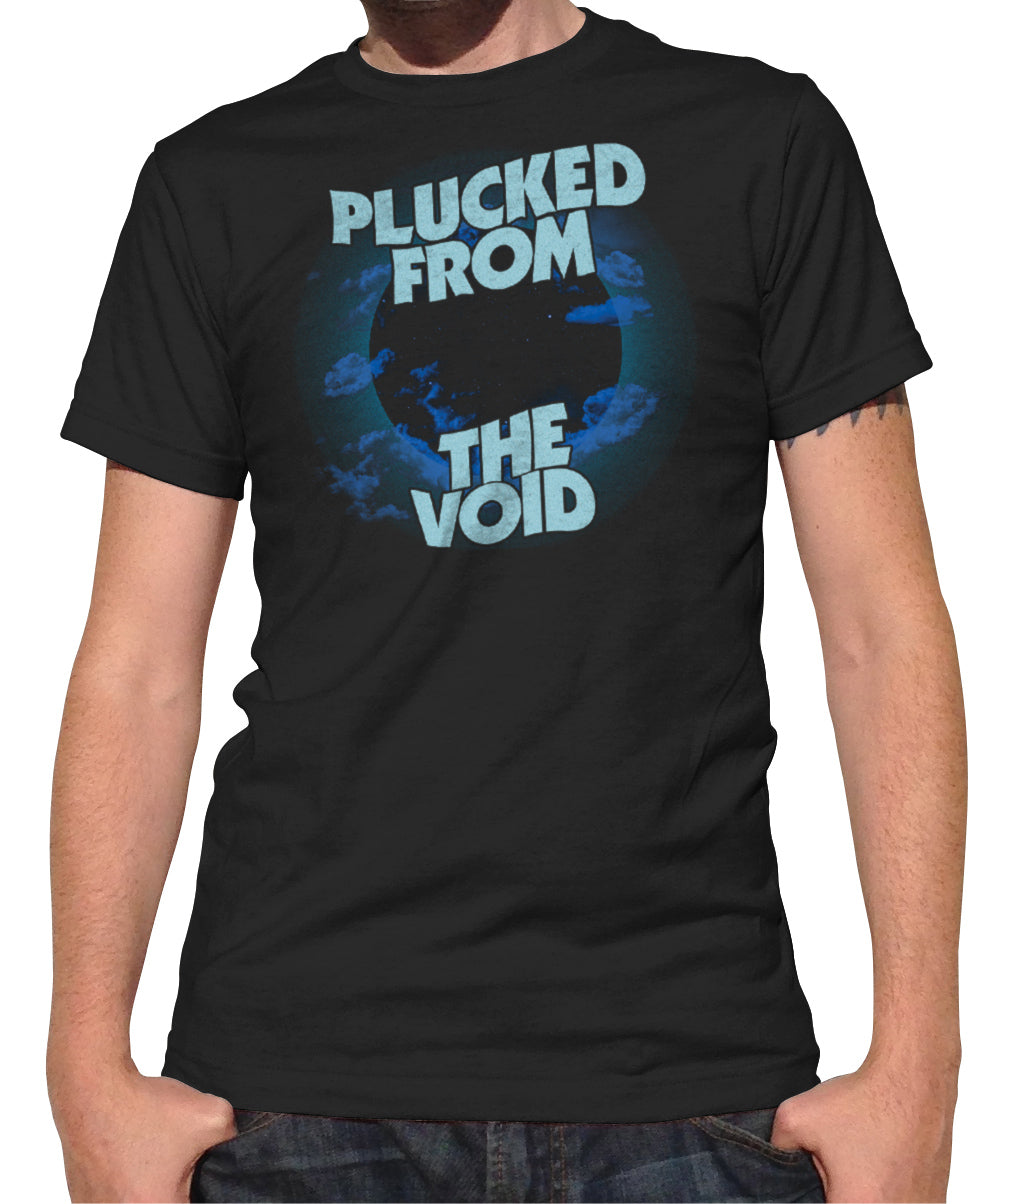 Men's Plucked From the Void T-Shirt